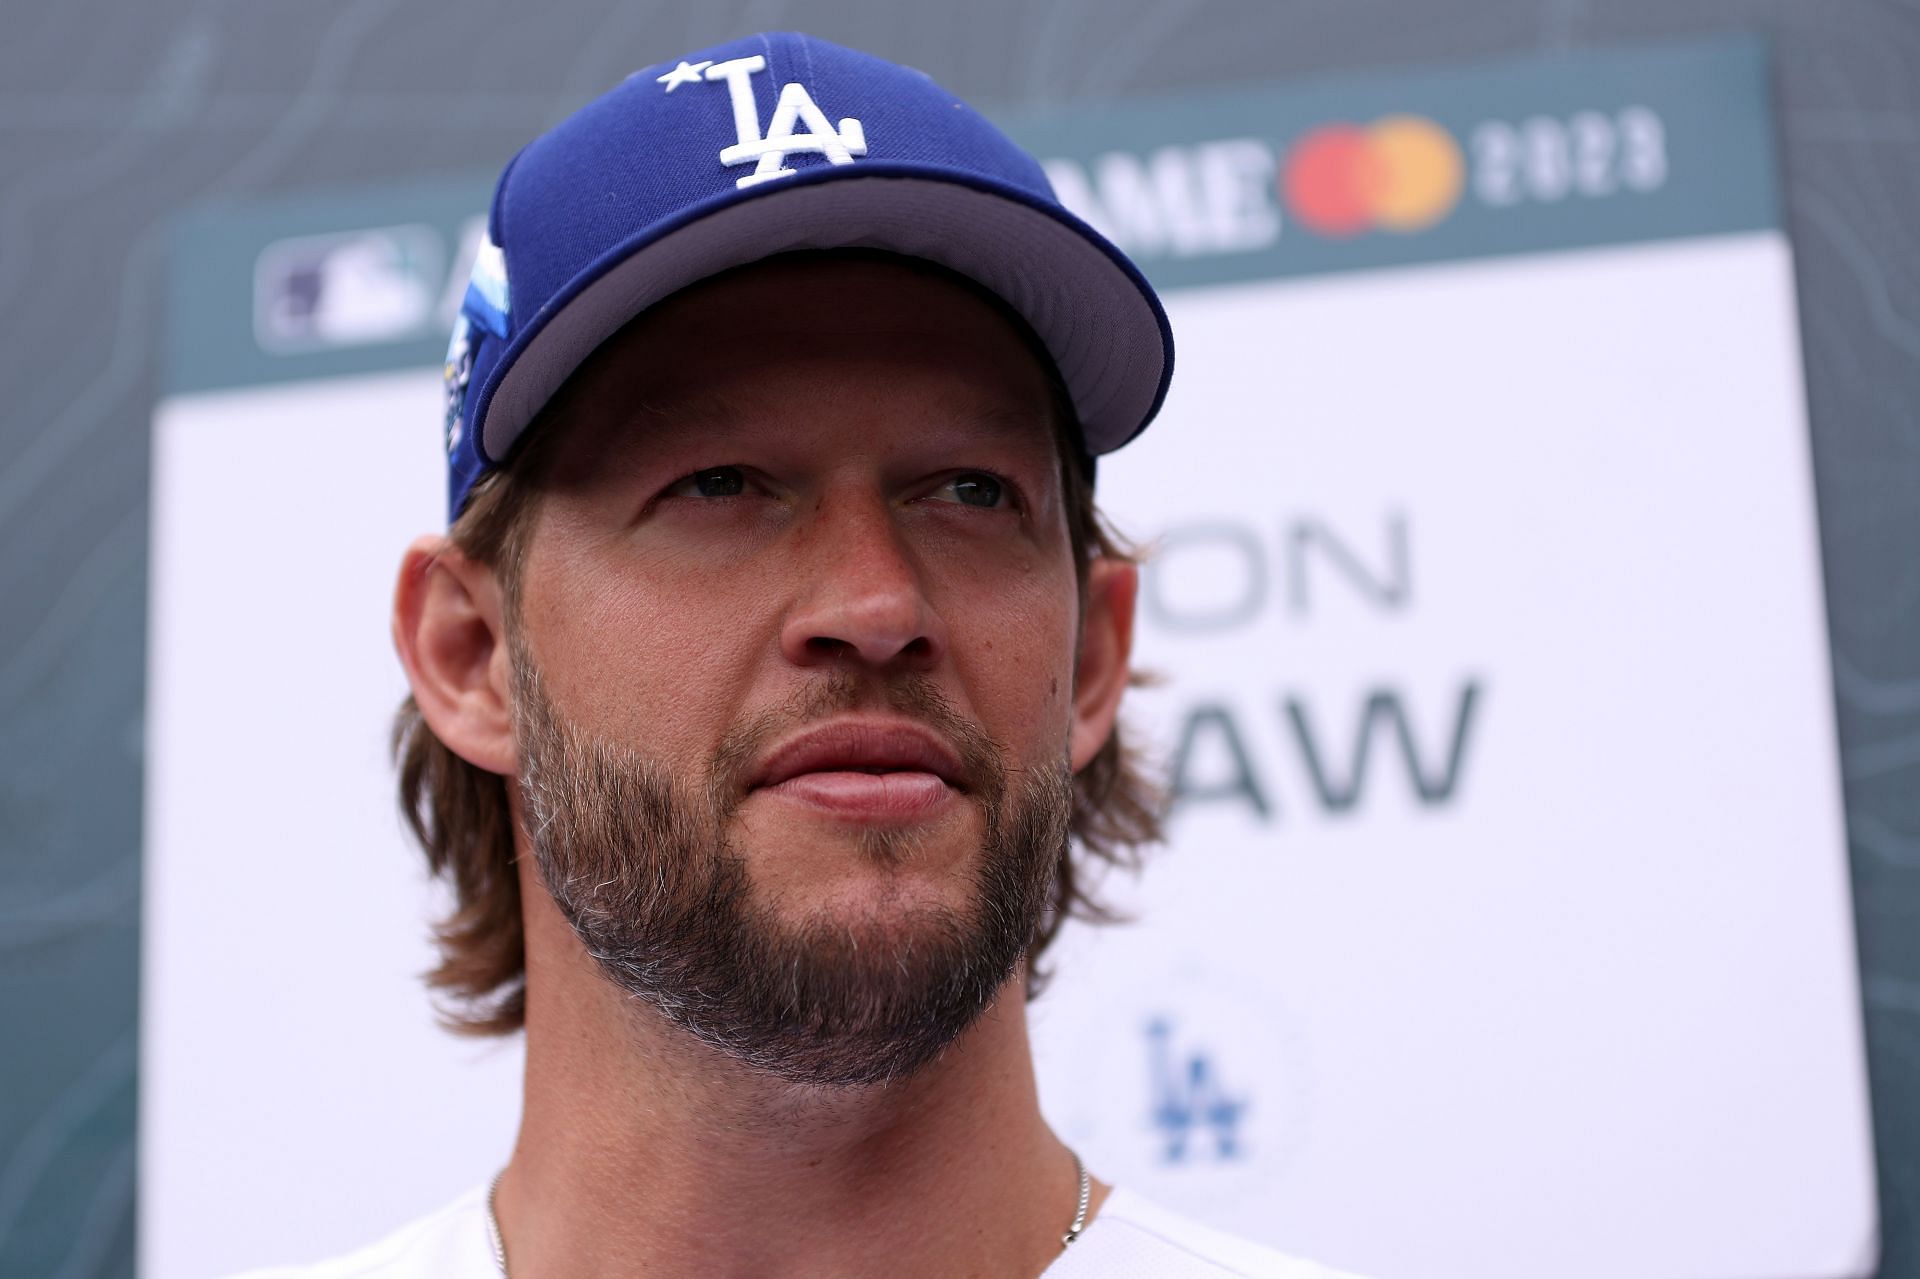 WATCH: Clayton Kershaw's son Charley shows off impressive wind up